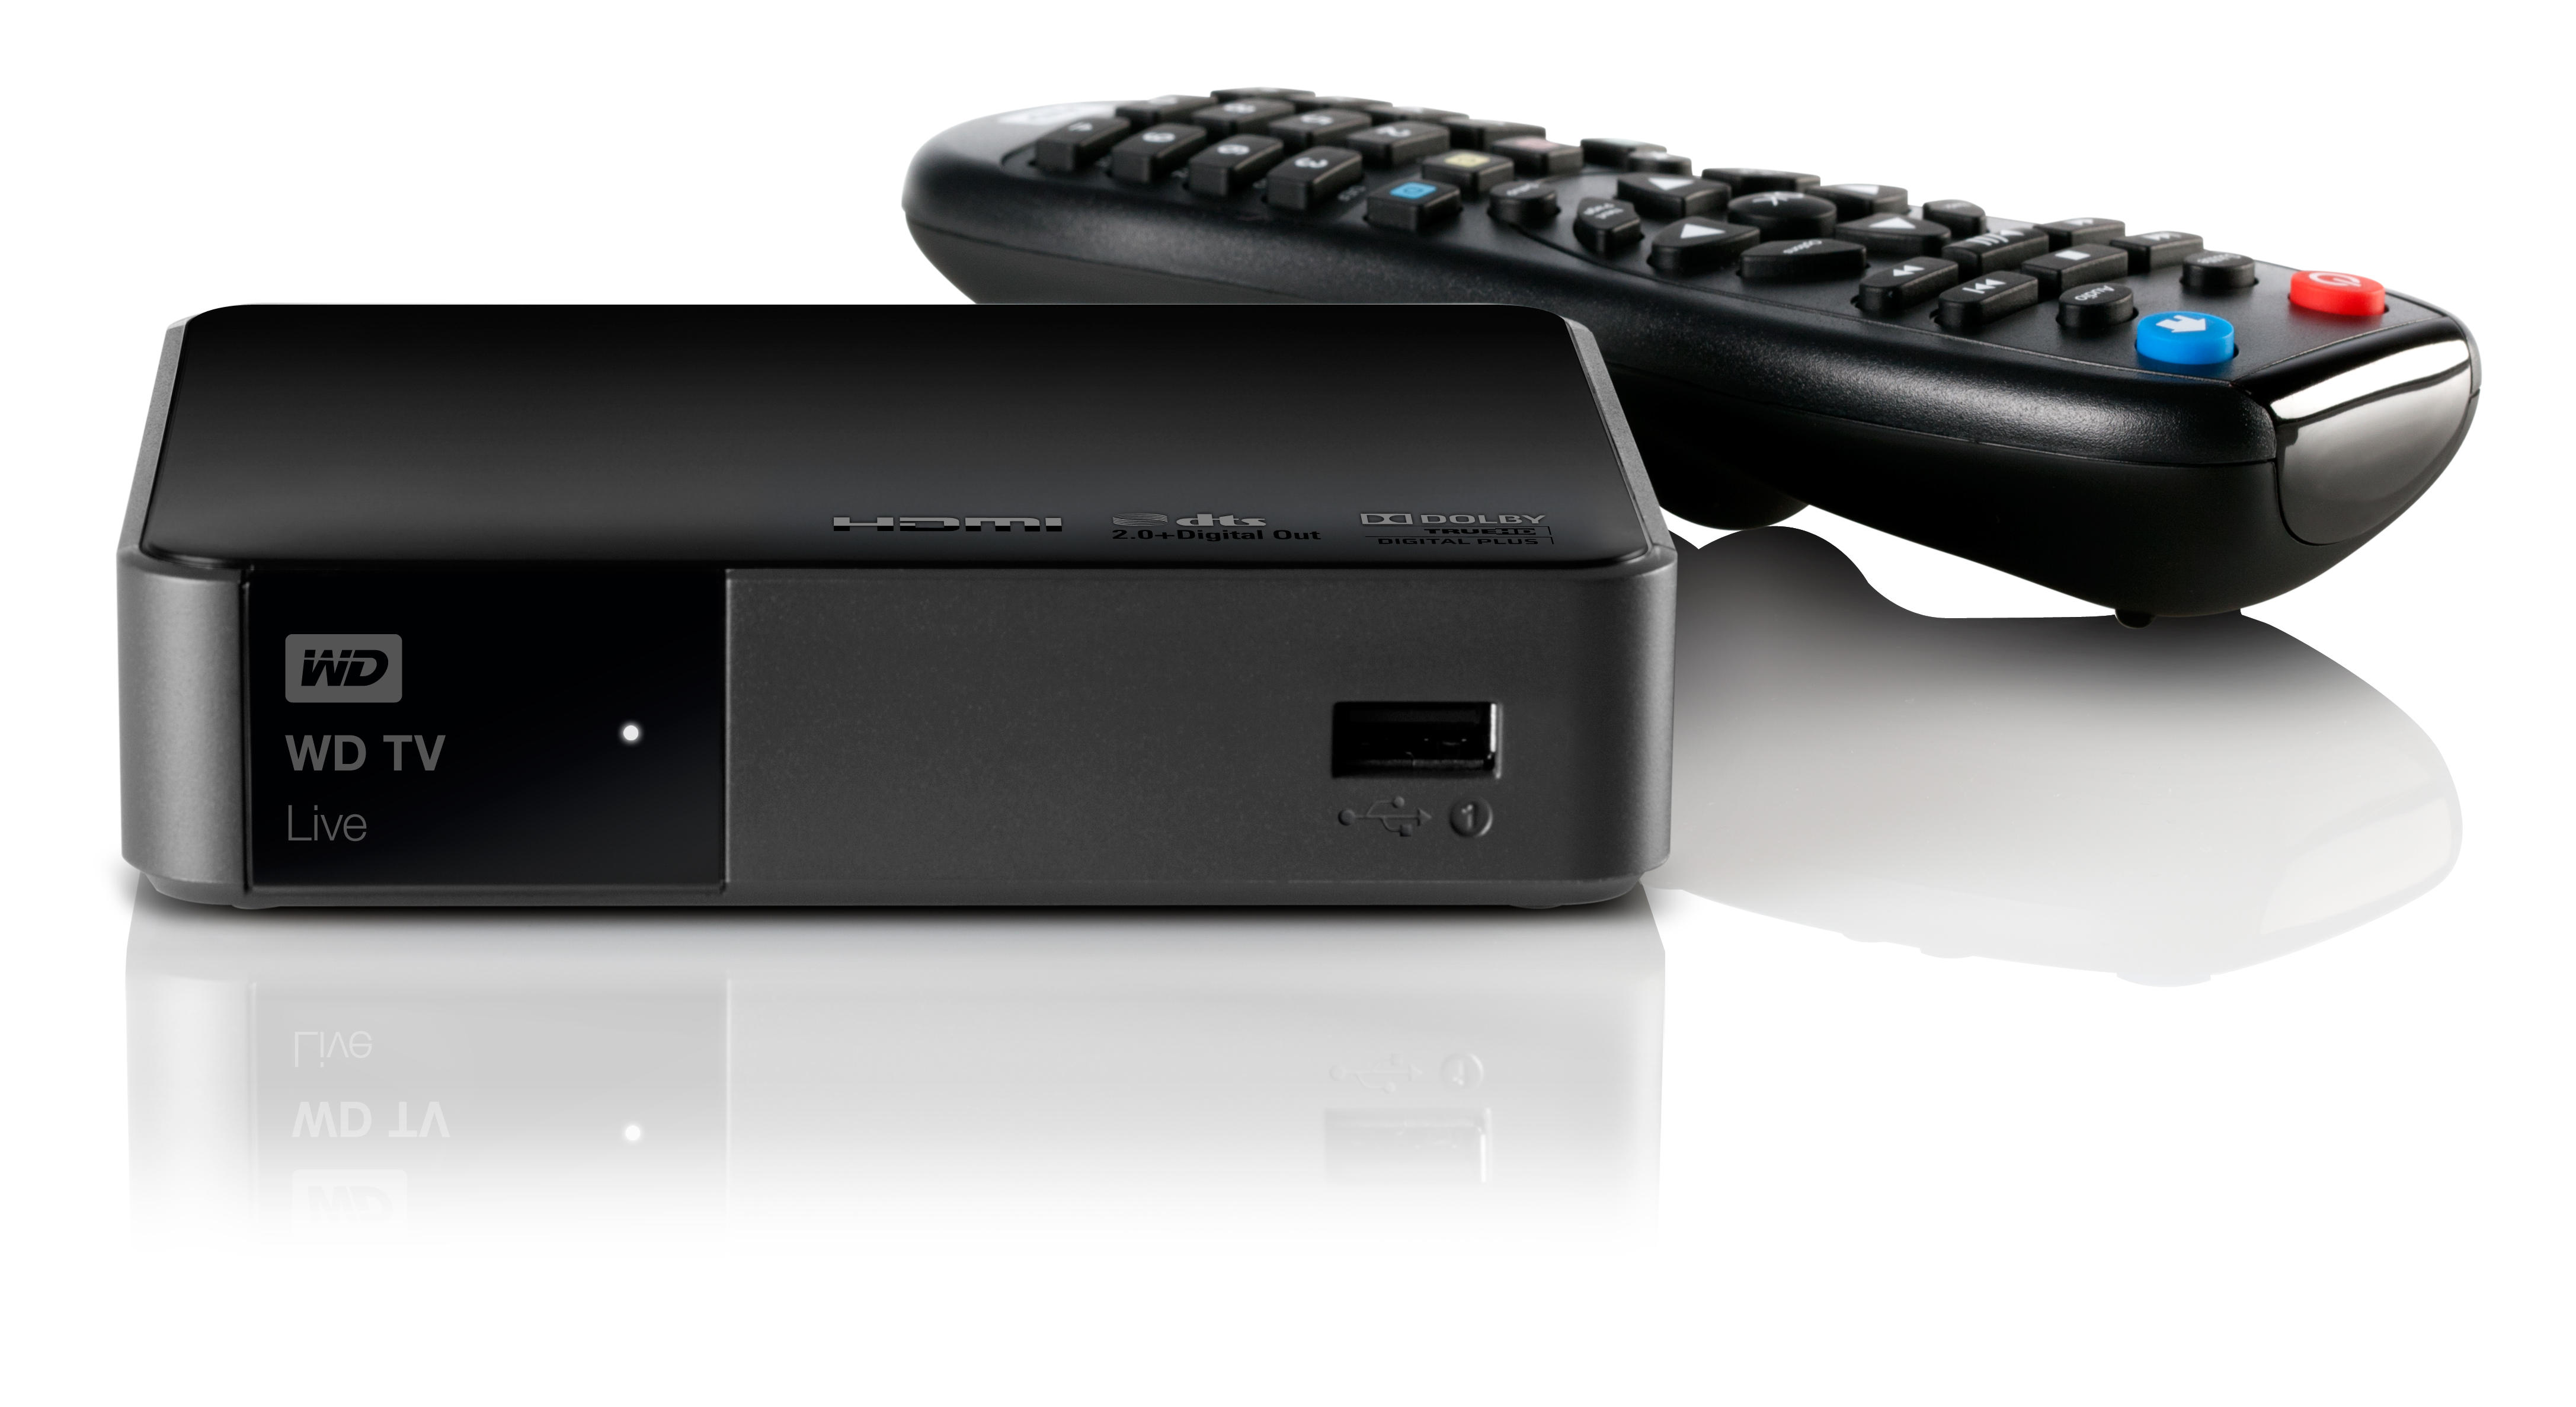 Kilimanjaro commit percent Western Digital Introduces New WD TV Live Streaming Media Player with  Spotify in Tow